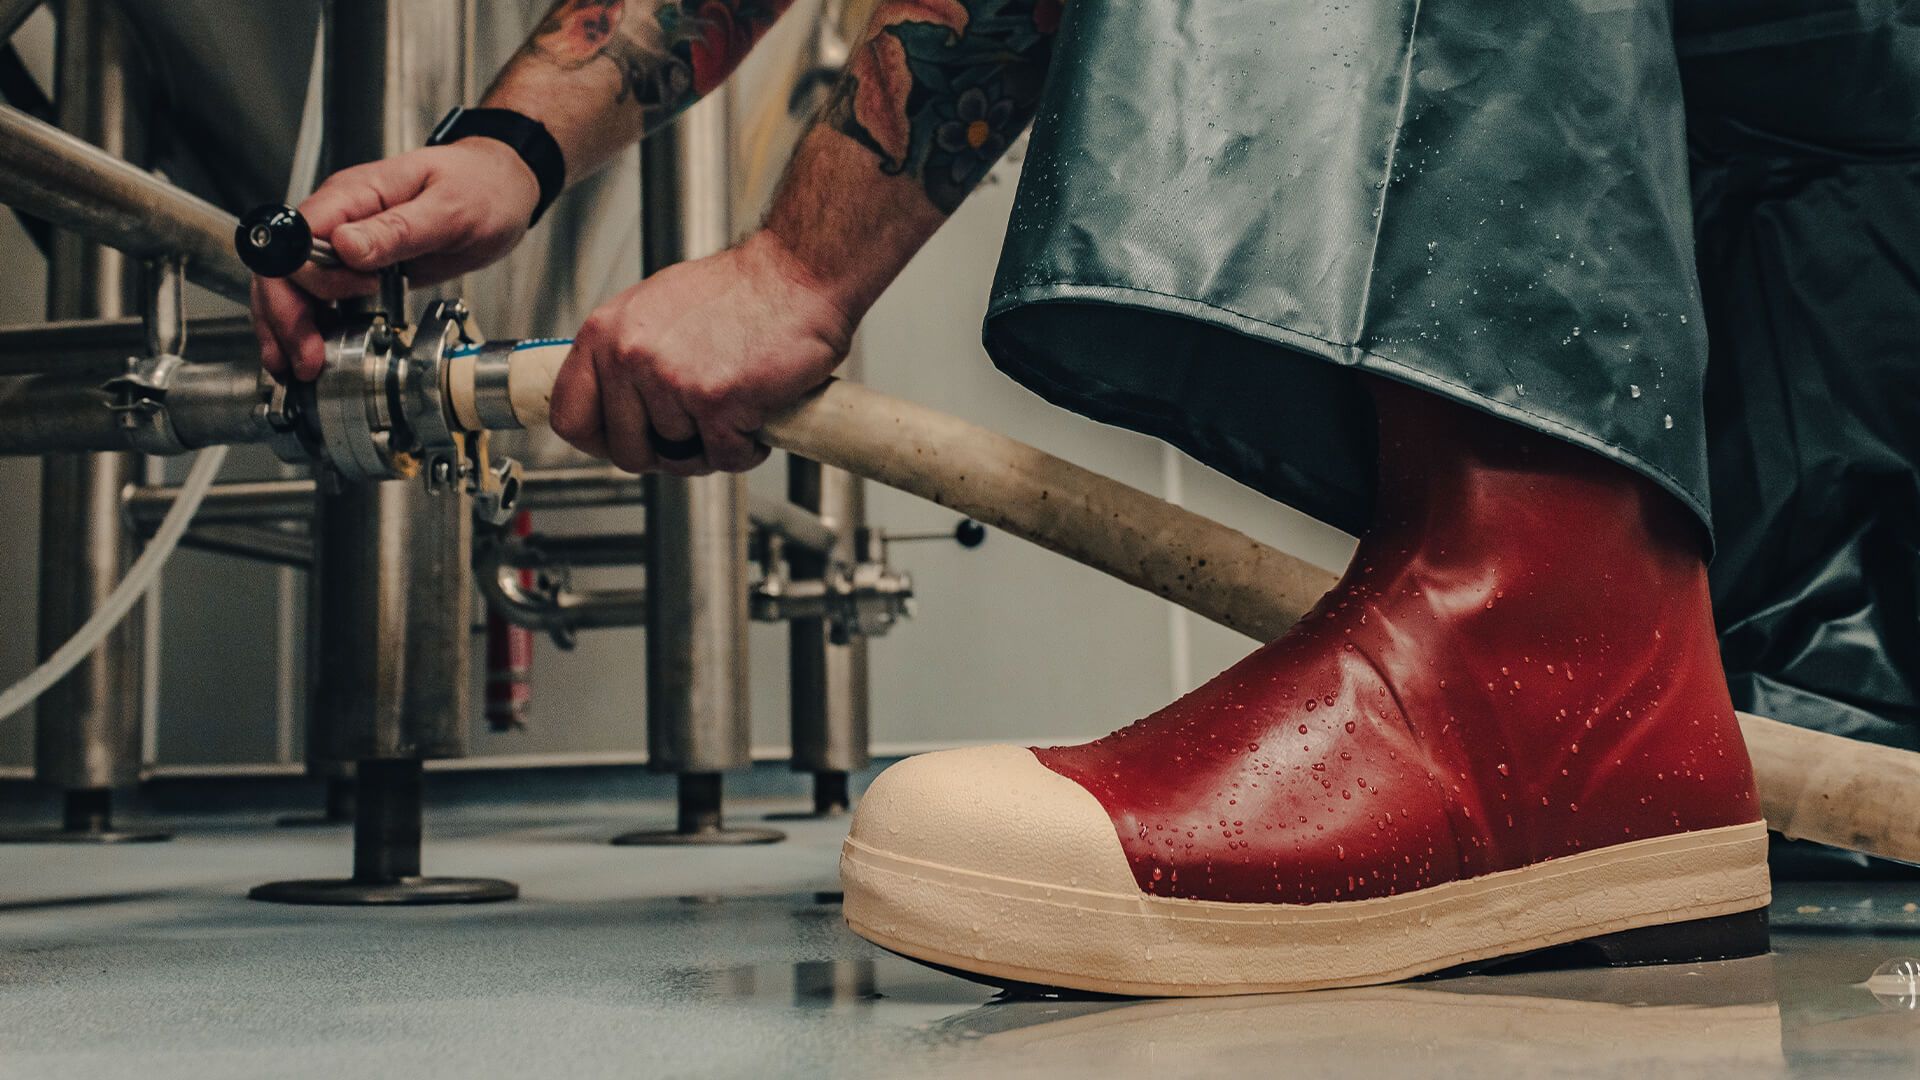 man working in brewery wearing tingely boots